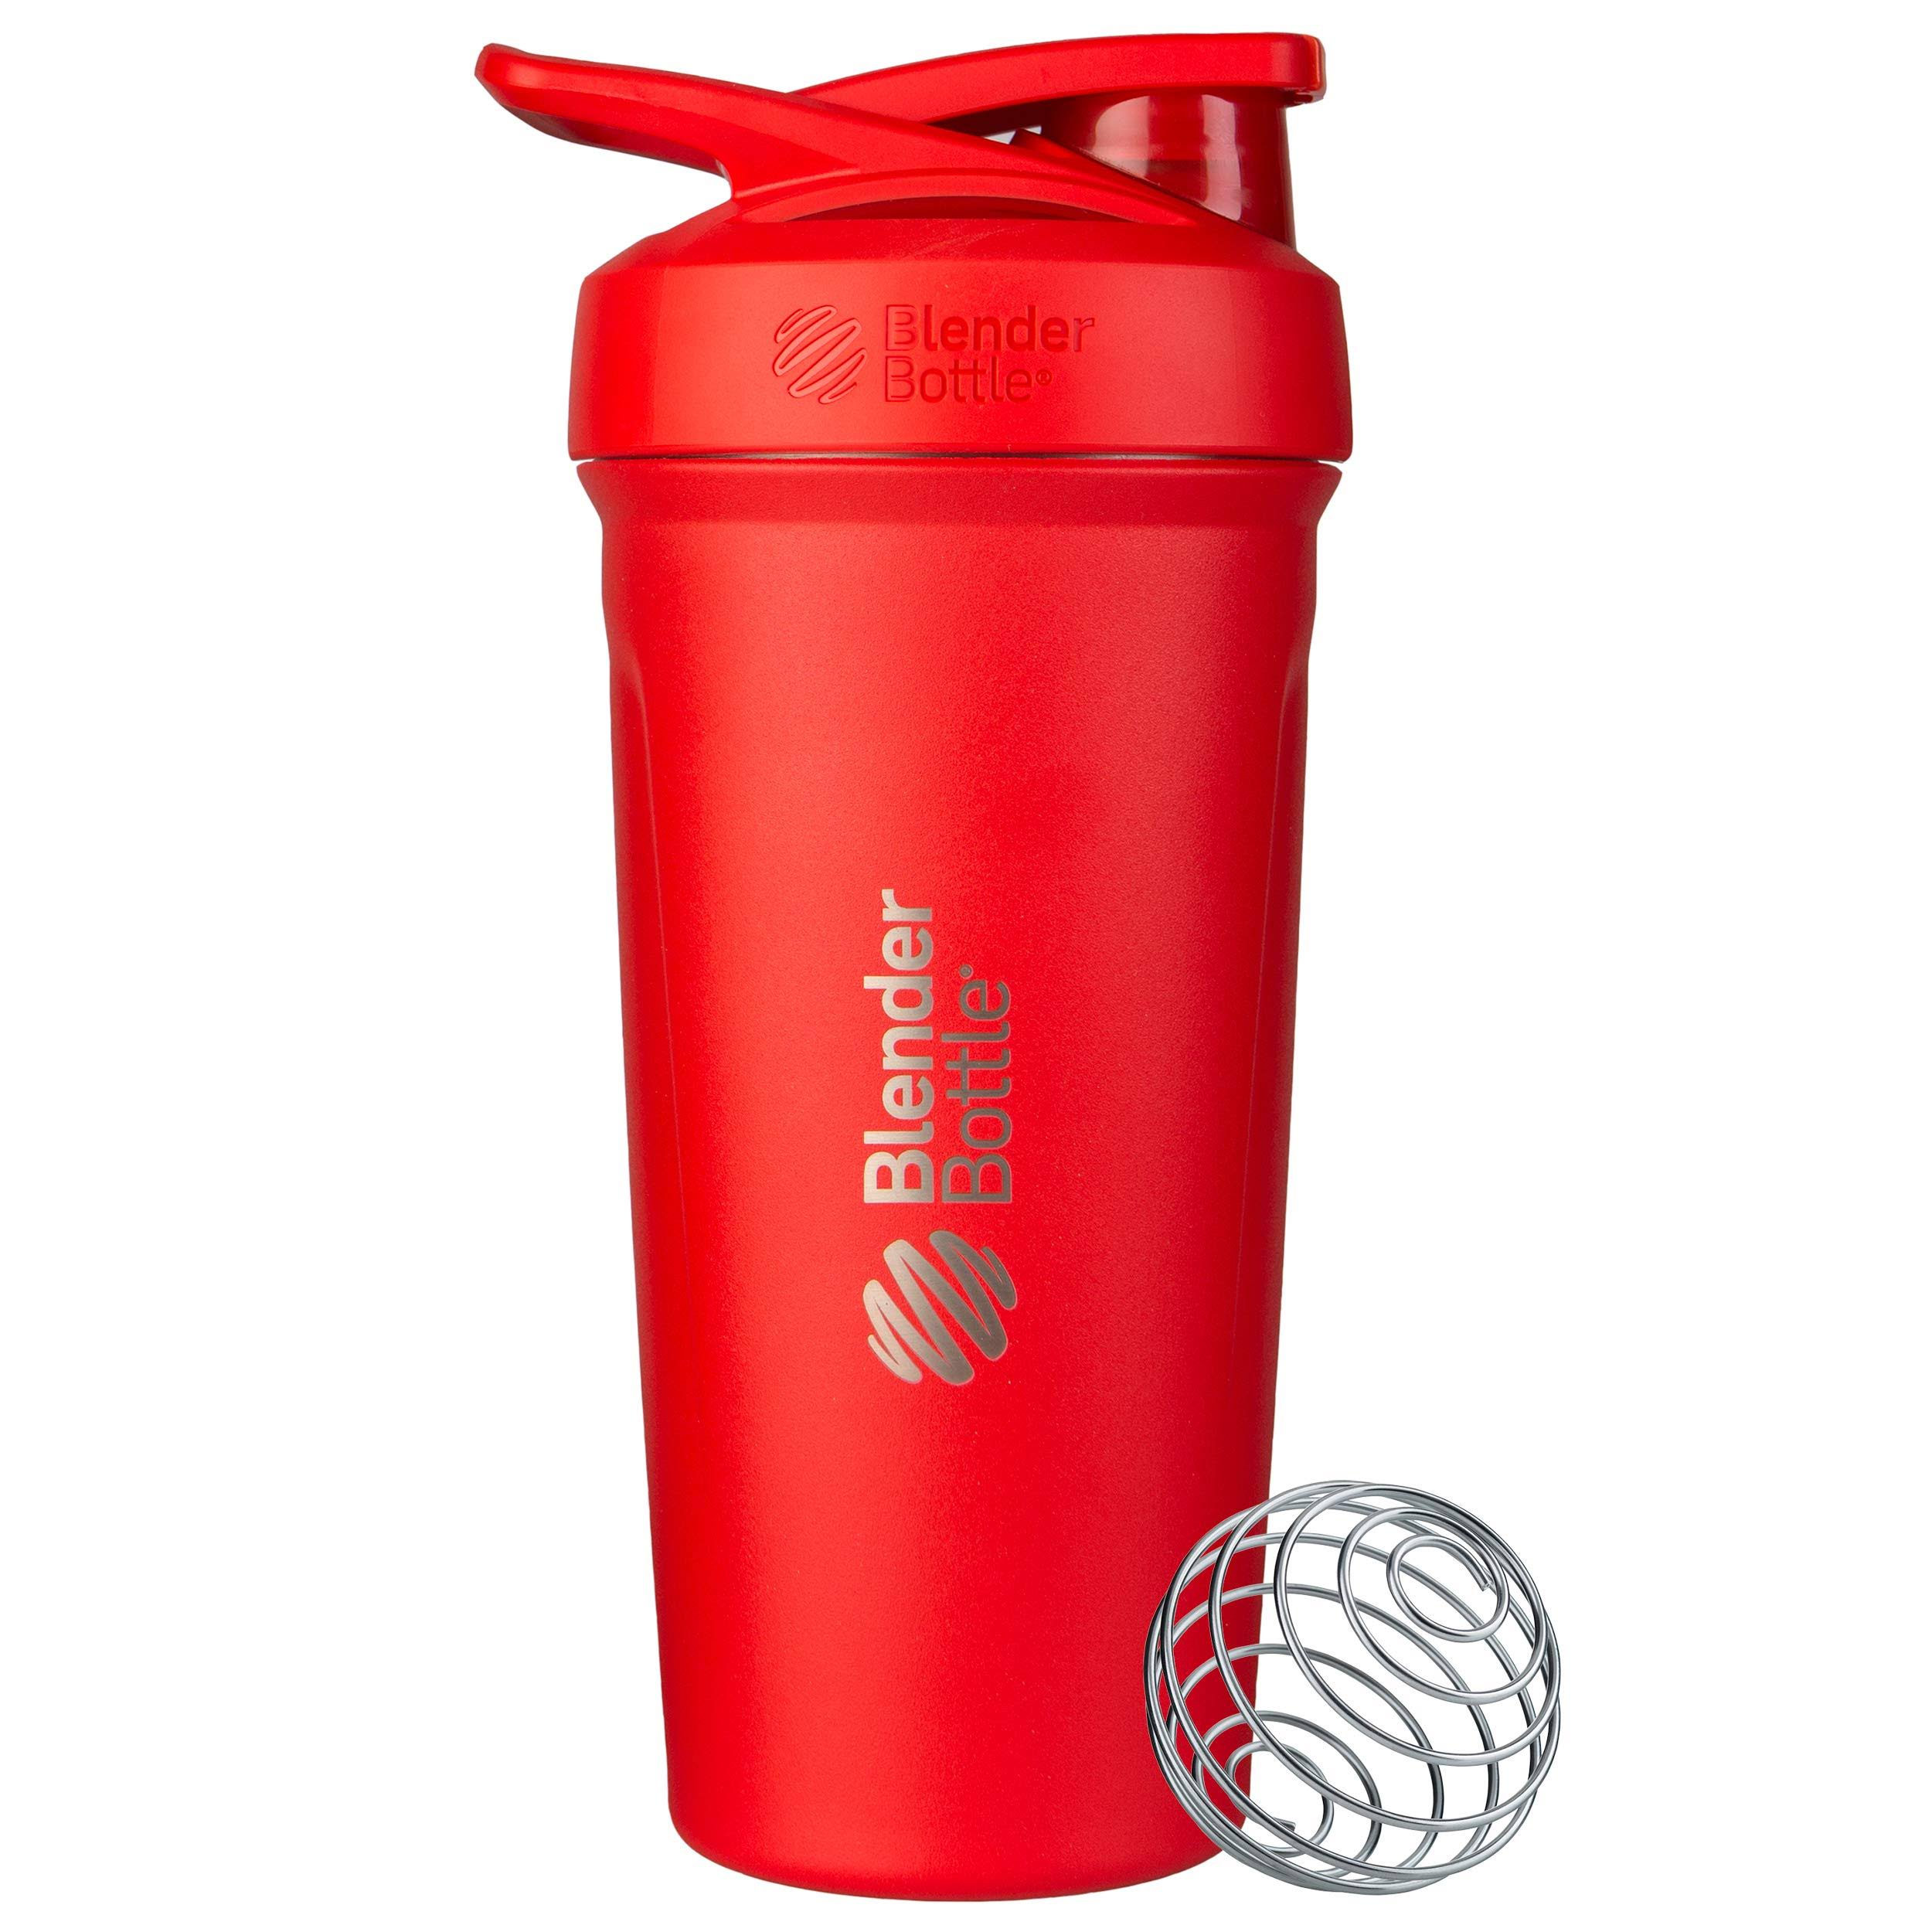 BlenderBottle Strada Insulated Shaker Bottle with Locking Lid Stainless Steel 24-Ounce 710ml Red - AfterPay & zipPay Available